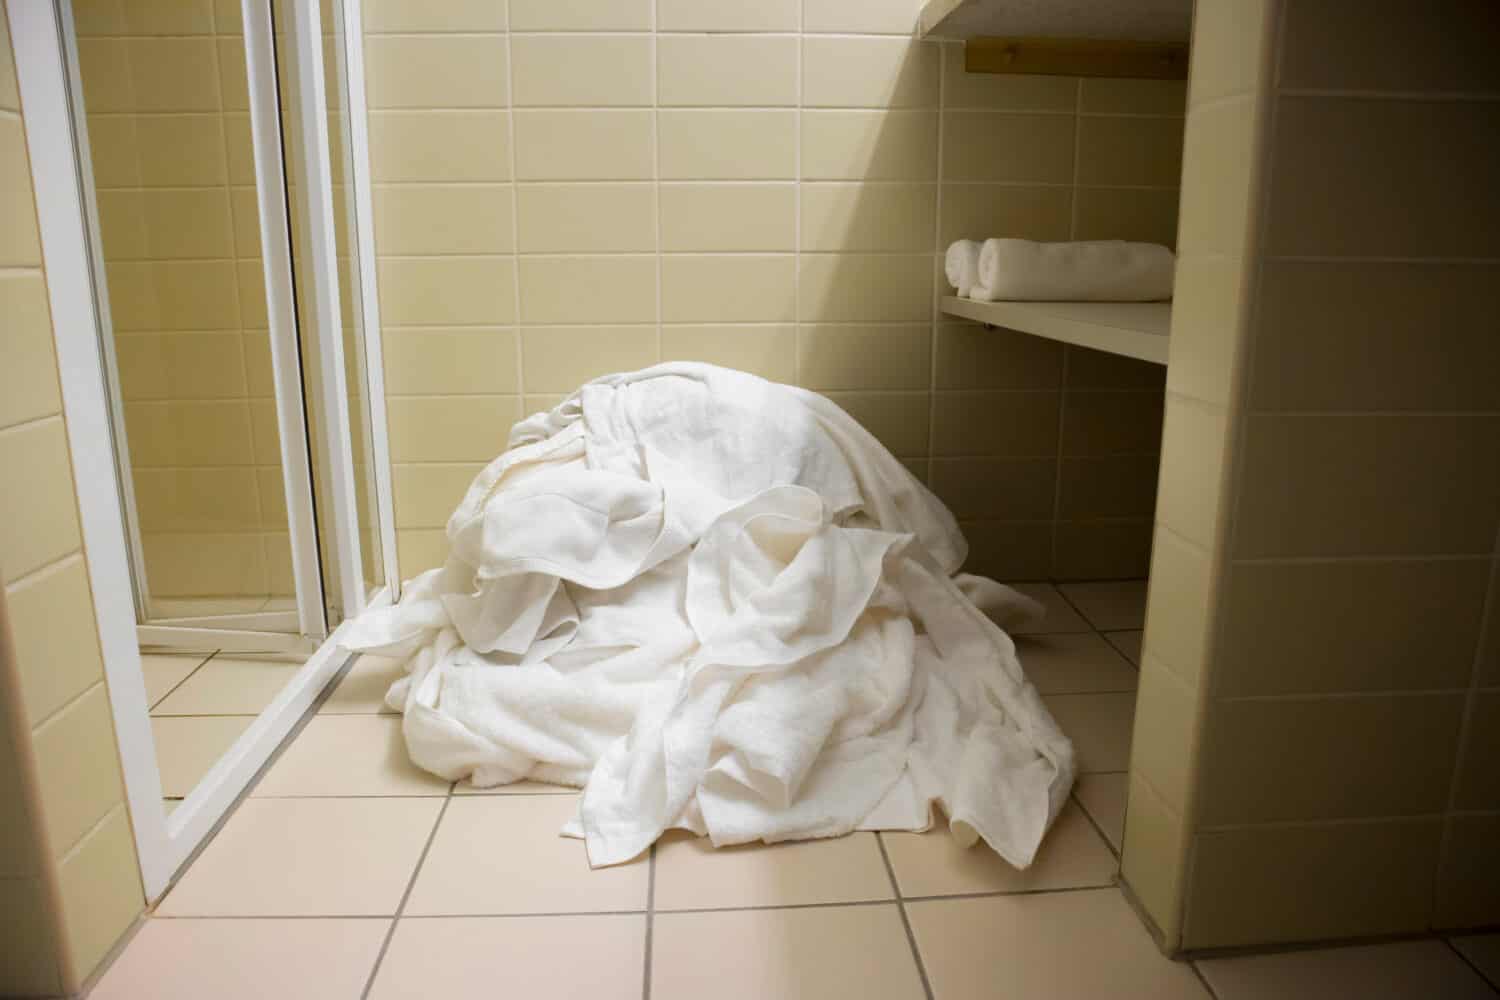 Pile of dirty used towels on the hotel bathroom floor. Housekeeping replace only the used towels on floor with clean ones. Saving water, soap, energy as a green policy.